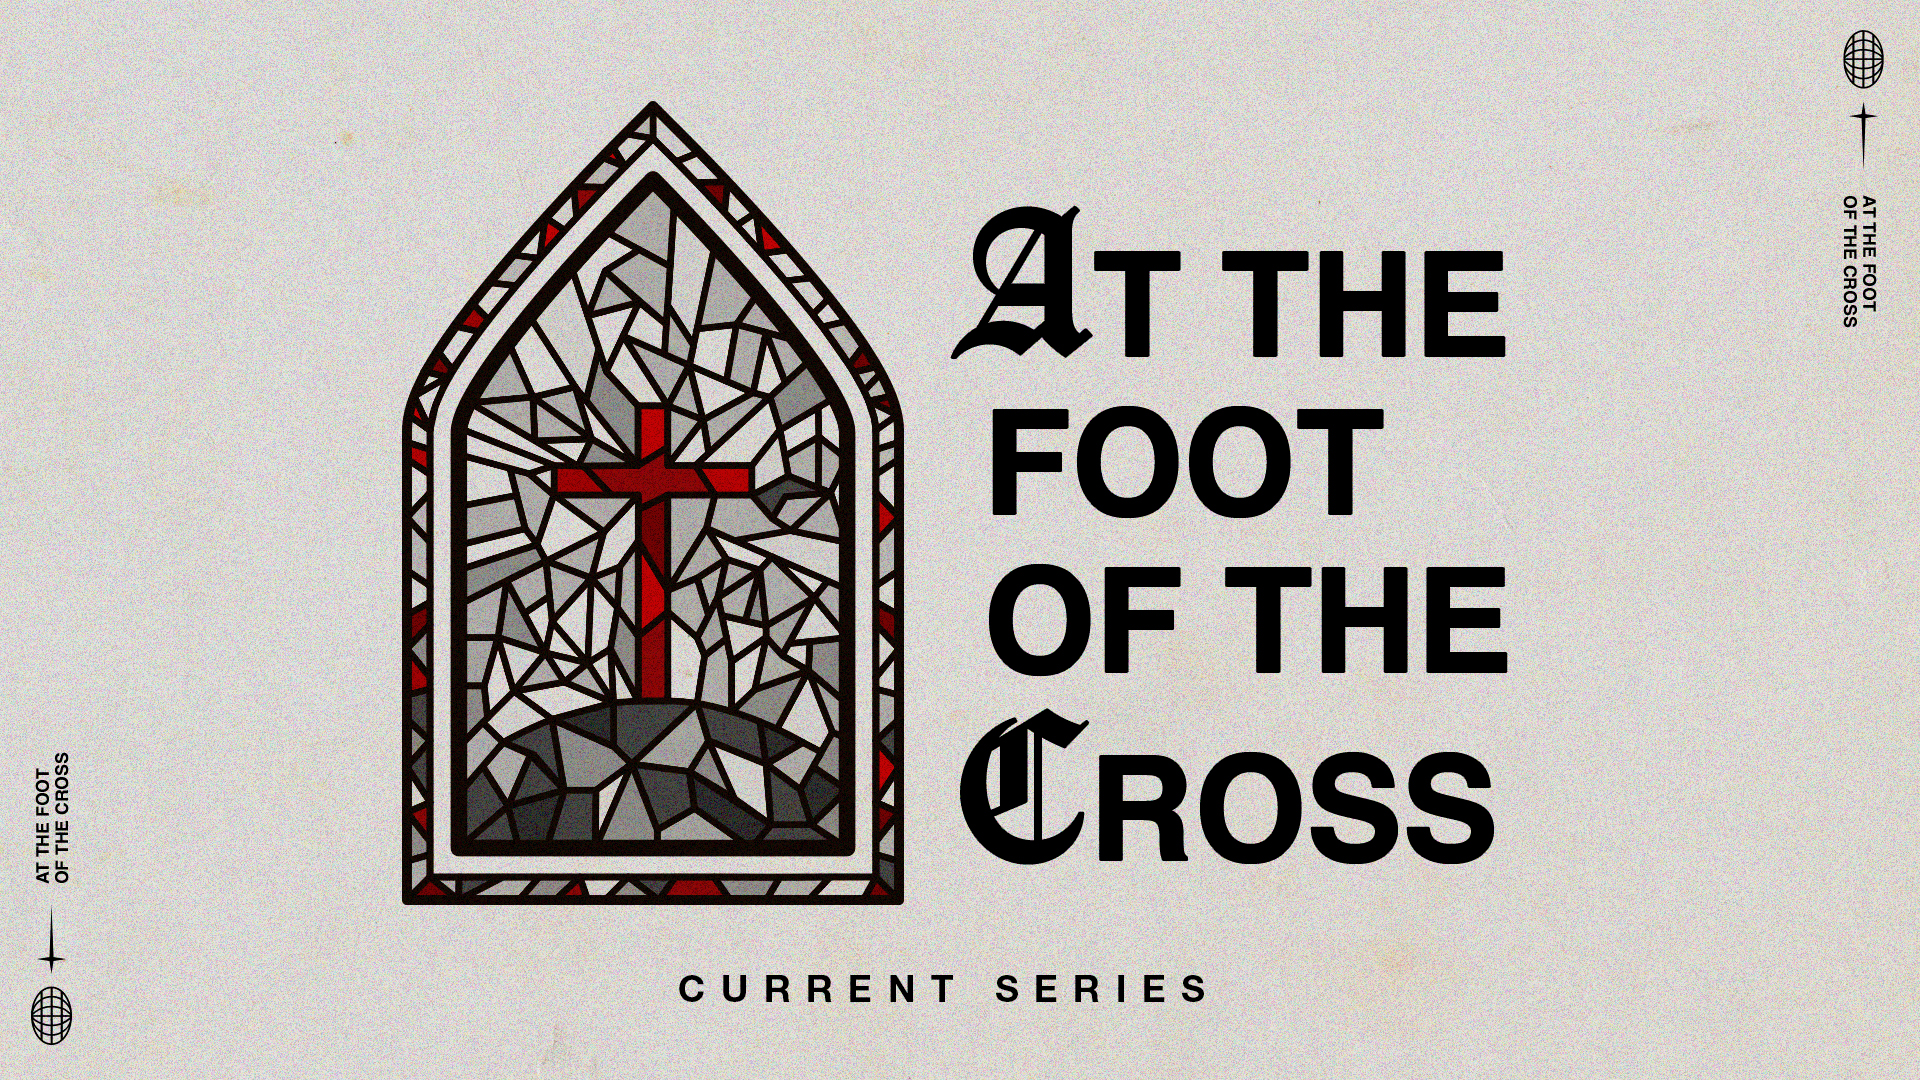 At The Foot of the Cross